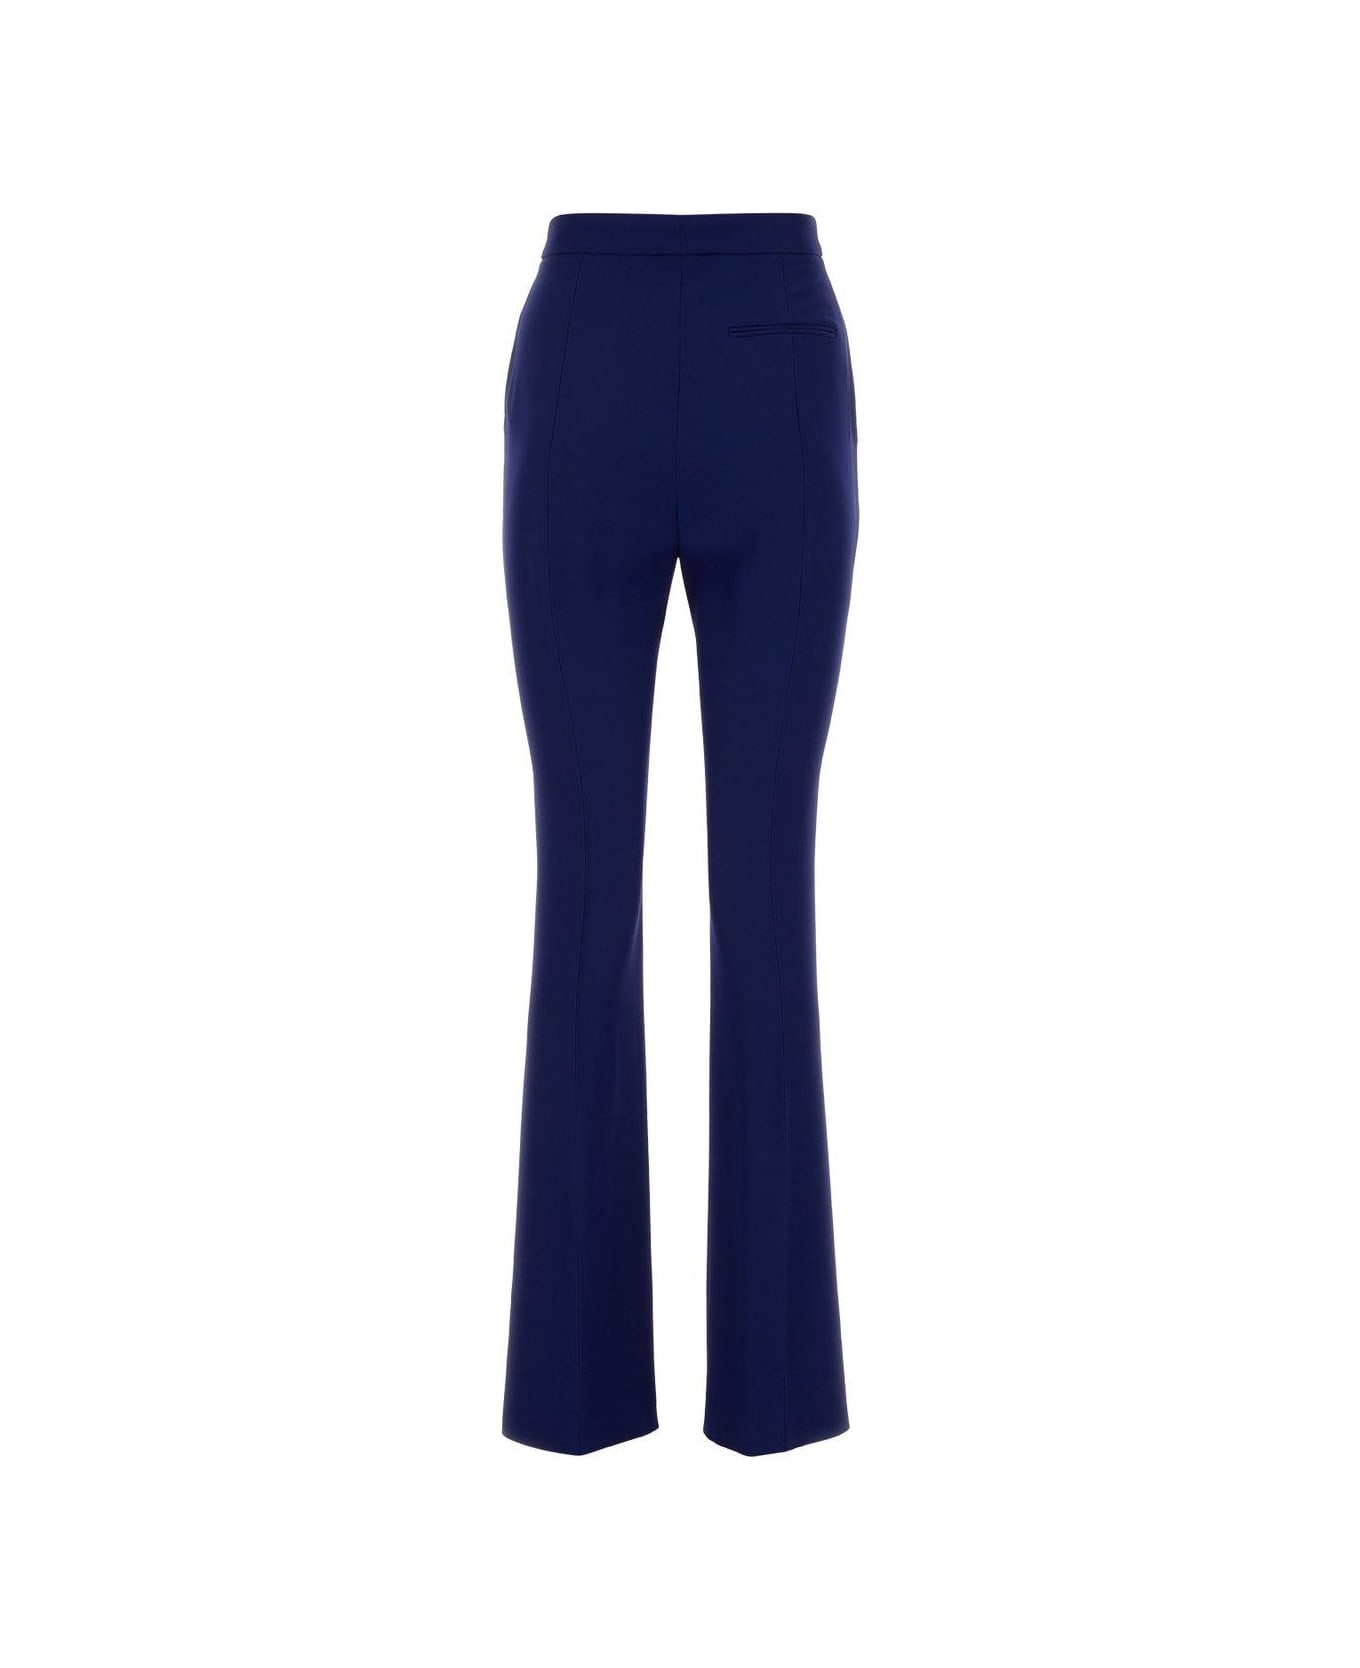 Alexander McQueen High-waisted Bootcut Slim Trousers - Electric navy